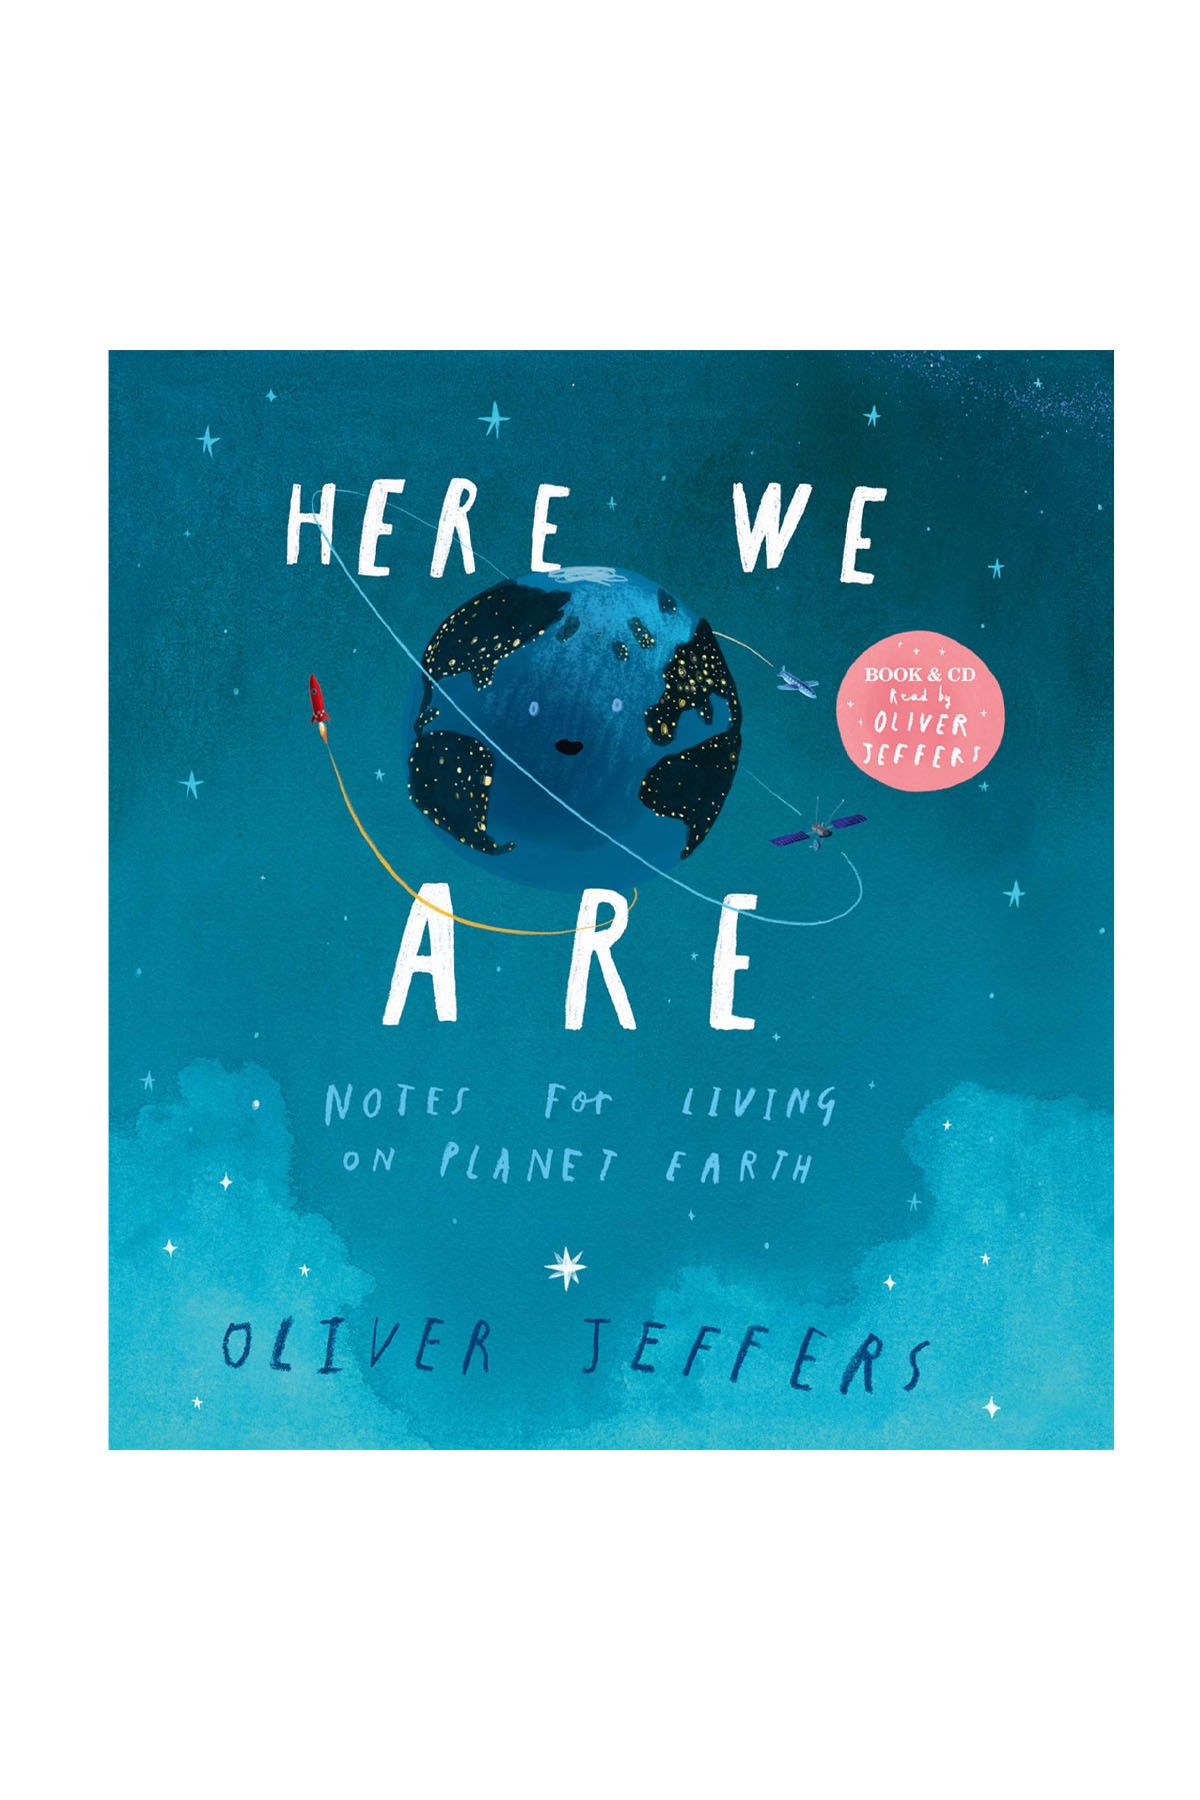 HC - Here We Are Mix (Oliver Jeffers)